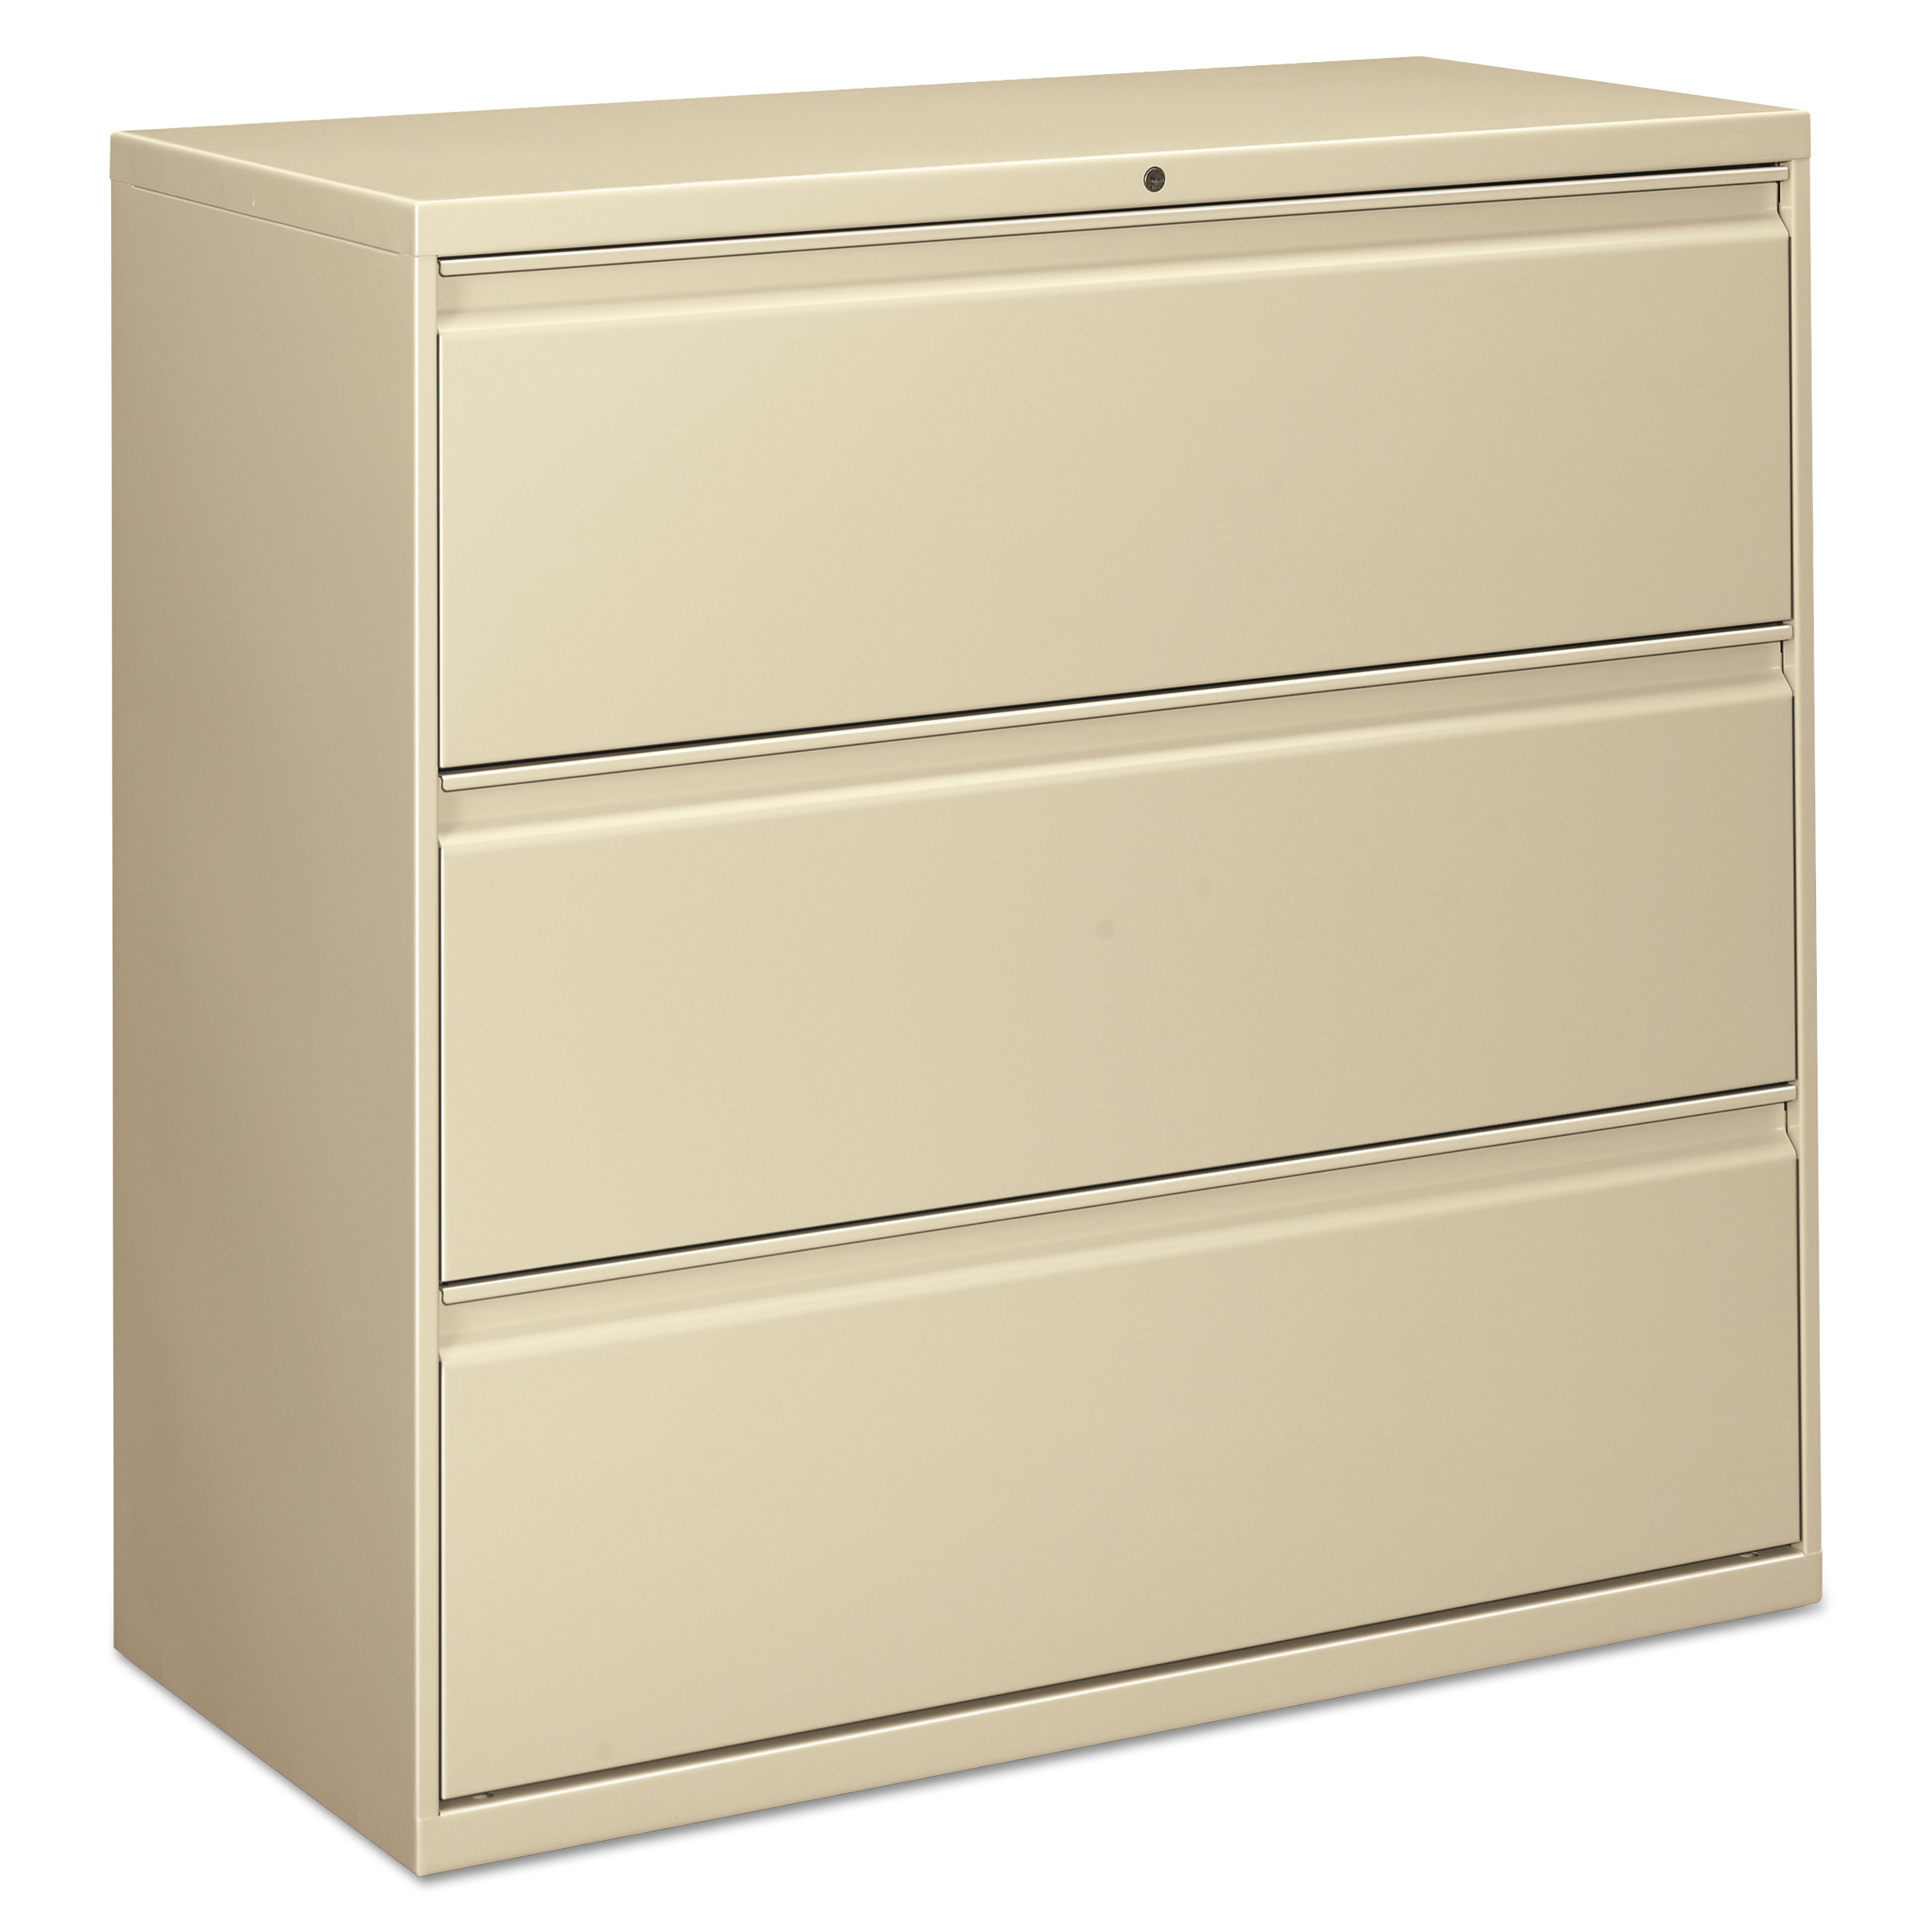 Three-Drawer Lateral File Cabinet, 42w x 18d x 39 1/2h, Putty